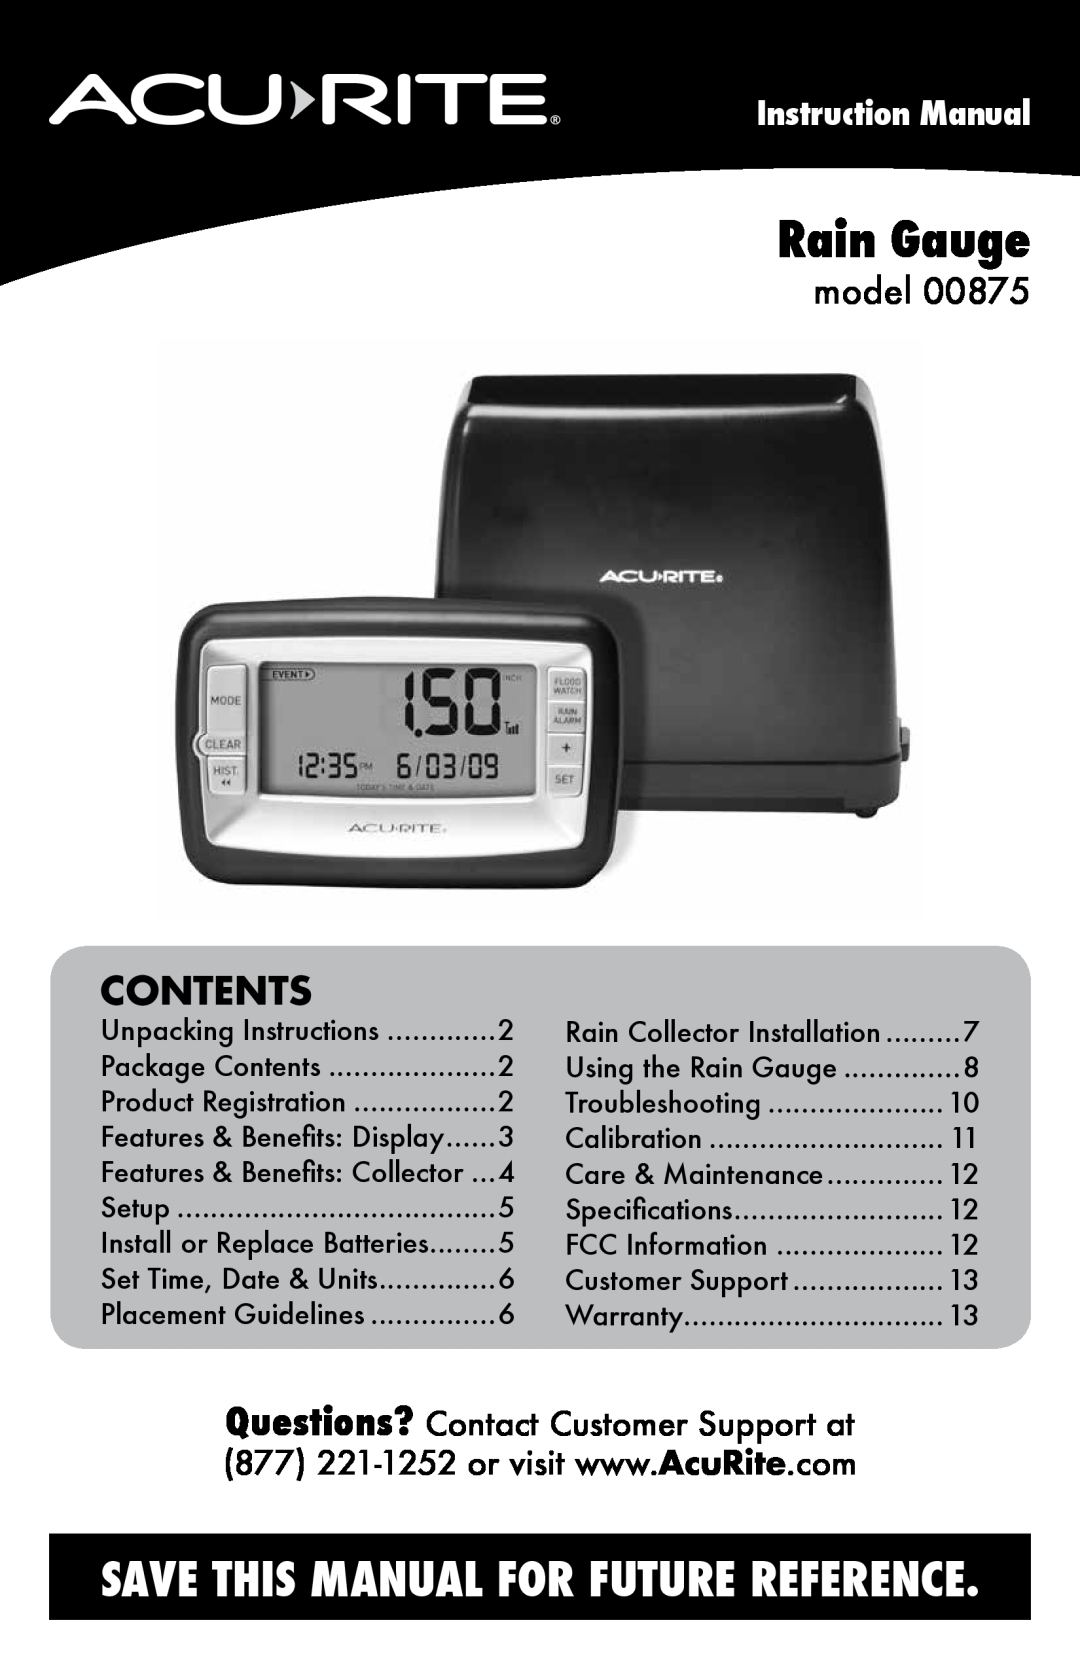 Acu-Rite 875 instruction manual Contents, model, Rain Gauge, Save This Manual For Future Reference 